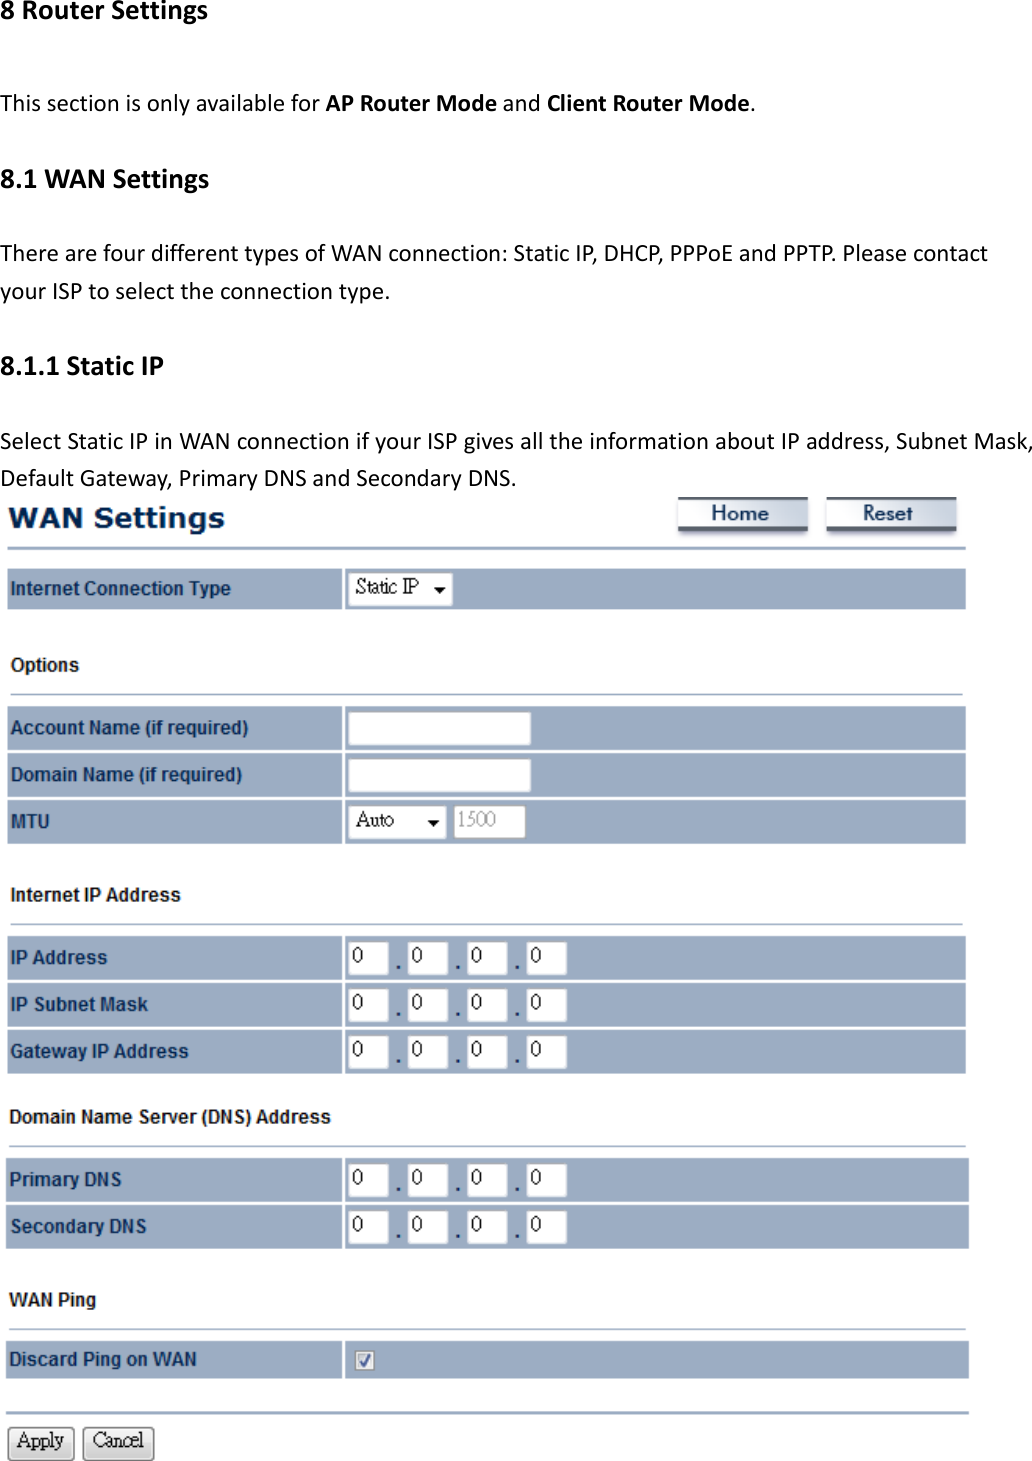 8 Router Settings This section is only available for AP Router Mode and Client Router Mode. 8.1 WAN Settings There are four different types of WAN connection: Static IP, DHCP, PPPoE and PPTP. Please contact your ISP to select the connection type. 8.1.1 Static IP Select Static IP in WAN connection if your ISP gives all the information about IP address, Subnet Mask, Default Gateway, Primary DNS and Secondary DNS.  